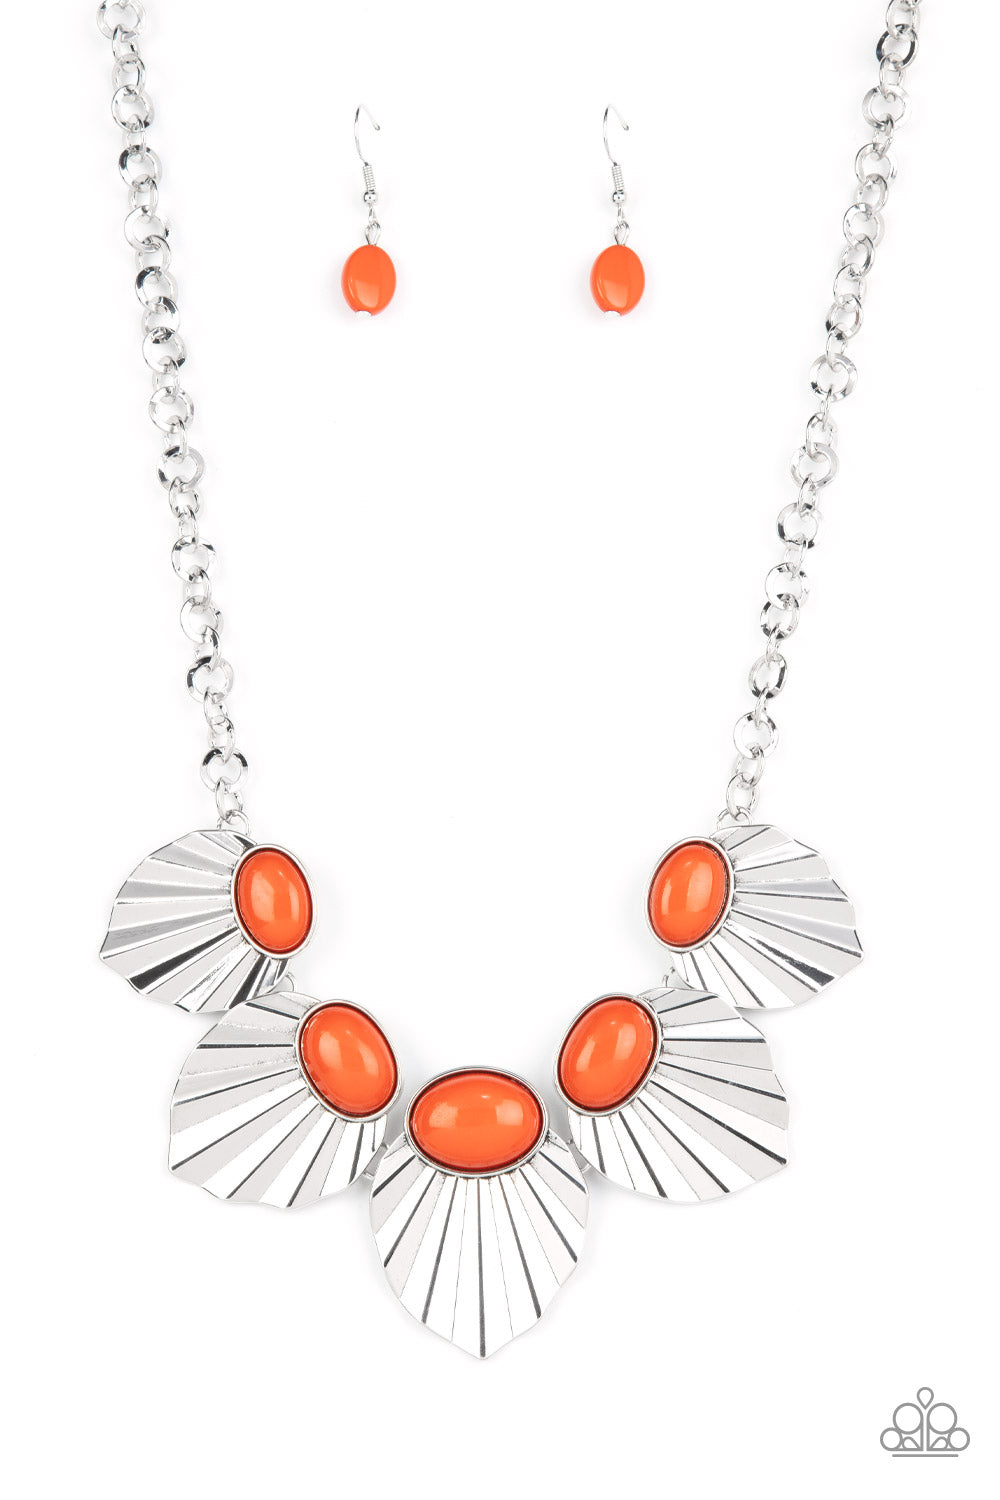 Fearlessly Ferocious Orange Necklace - Paparazzi Accessories  Crowned in oval Burnt Orange beads, a collection of crimped and scalloped silver frames gradually increase in size as they fearlessly fan out below the collar for a ferocious fashion. Features an adjustable clasp closure.  Sold as one individual necklace. Includes one pair of matching earrings.